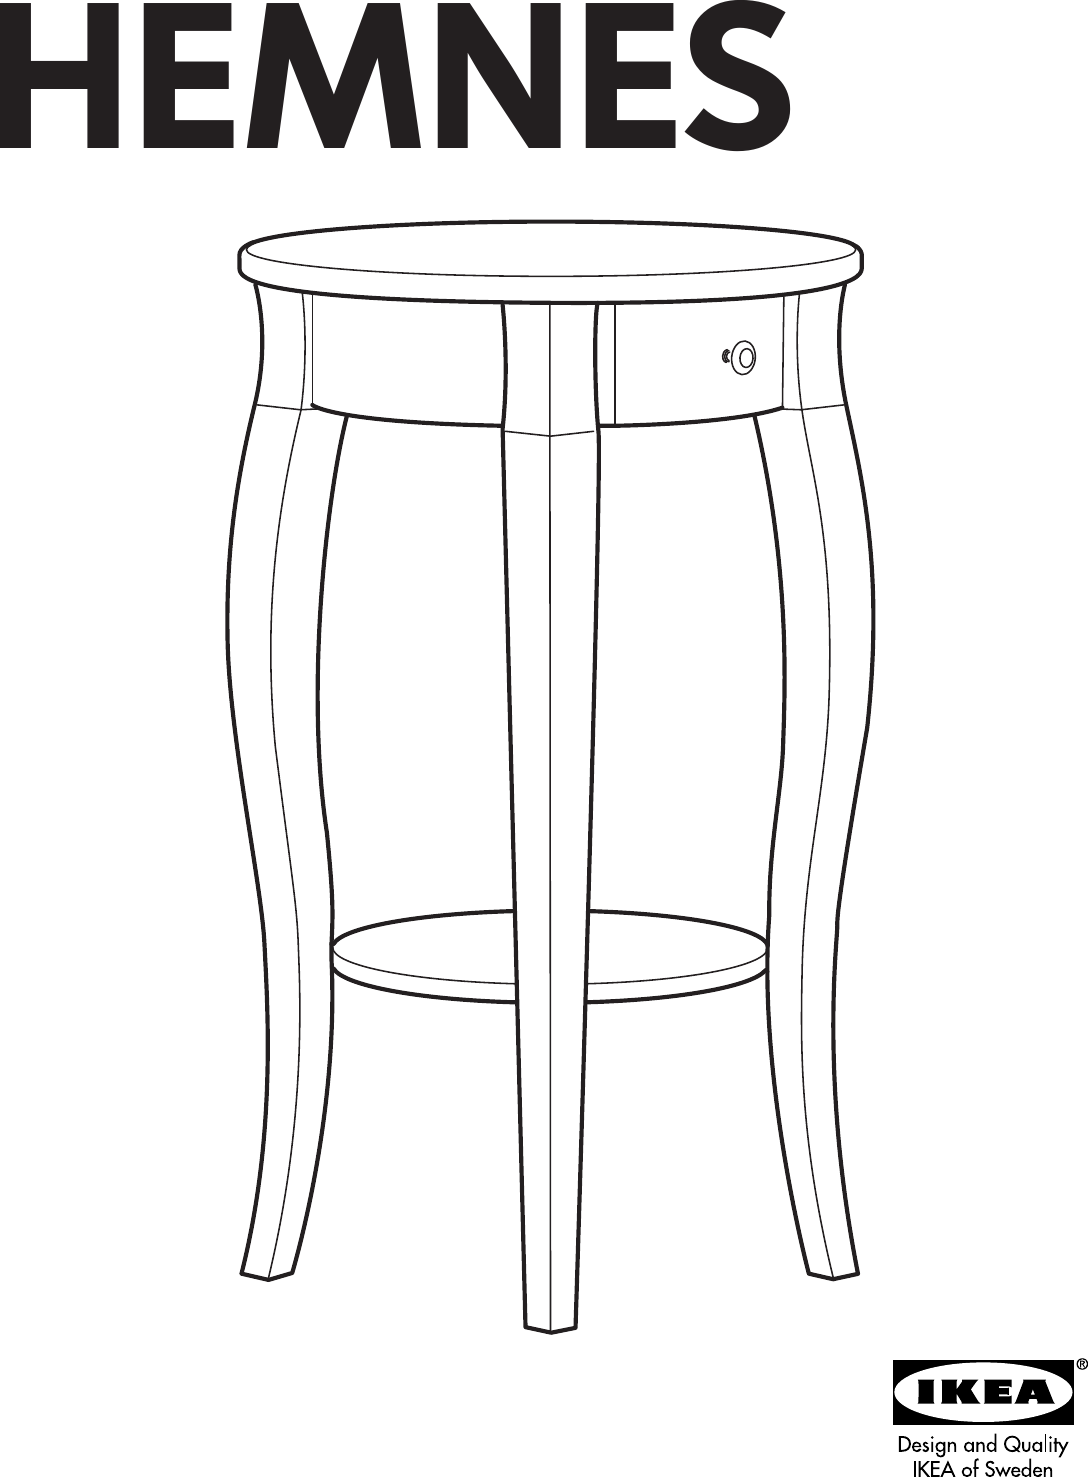 Ikea Hemnes Bedside Table 17 Round, Round Bedside Table Ikea